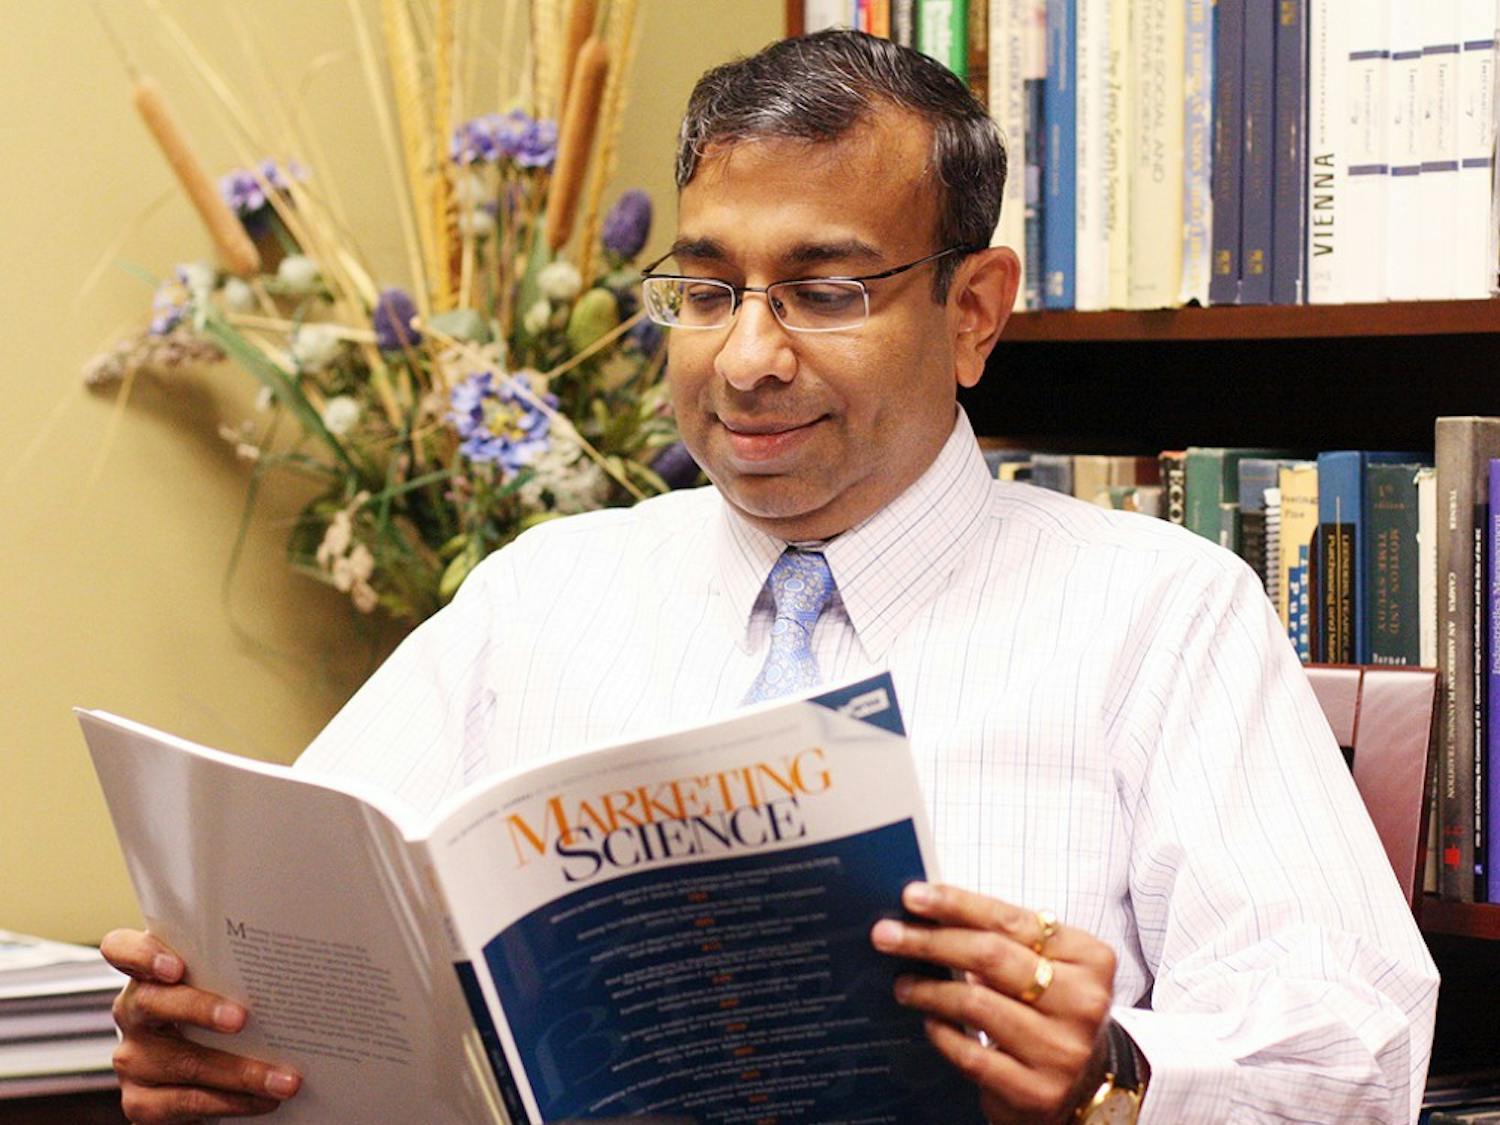 Sridhar Balasubramanian, marketing professor and associate Dean for the MBA program was named one of the 50 best business professors in the world. He said he thinks about teaching as "helping shape eager minds." He emphasized that teaching is three fold; students learn from teachers, students learn from each other, and  sometimes teachers learn from students. He also said, "Everyone can be innovative." And innovation includes motivation, opportunity, and ability. 